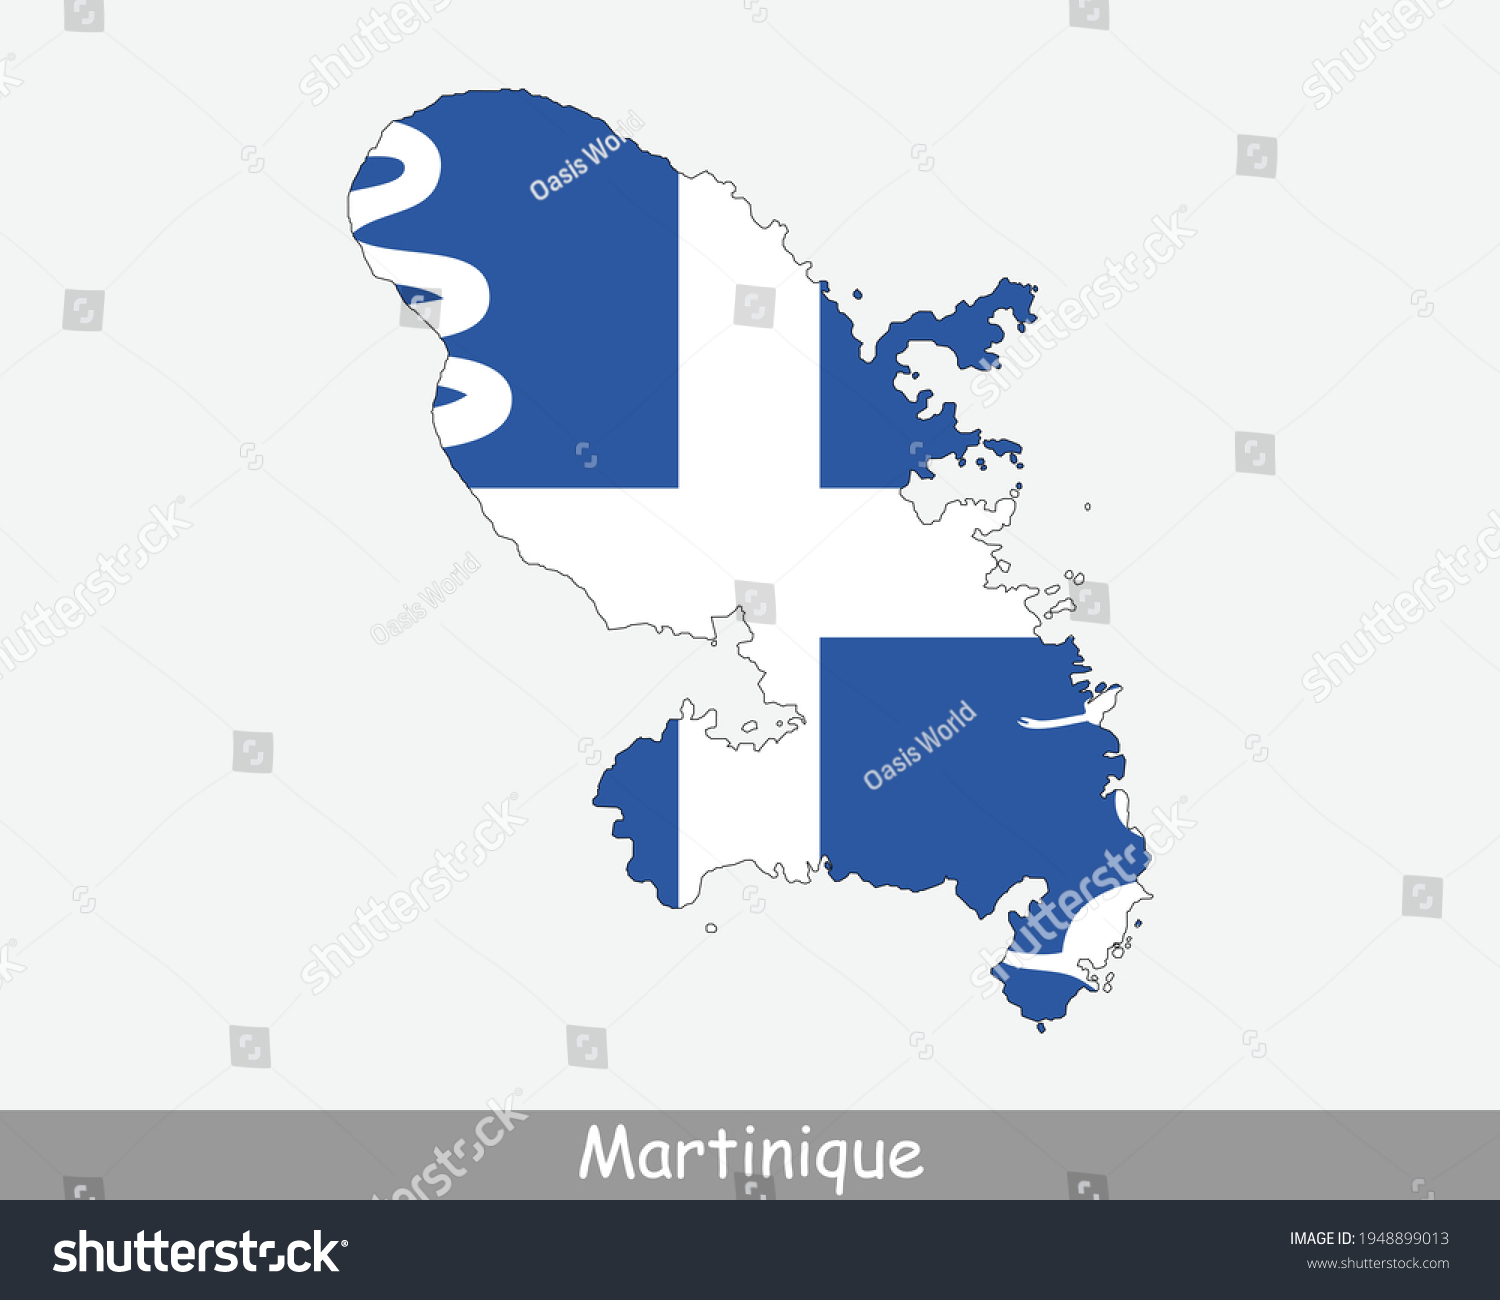 SVG of Martinique Map Flag. Map of Martinique with flag isolated on white background. Overseas department, region and single territorial collectivity of France. Vector illustration. svg